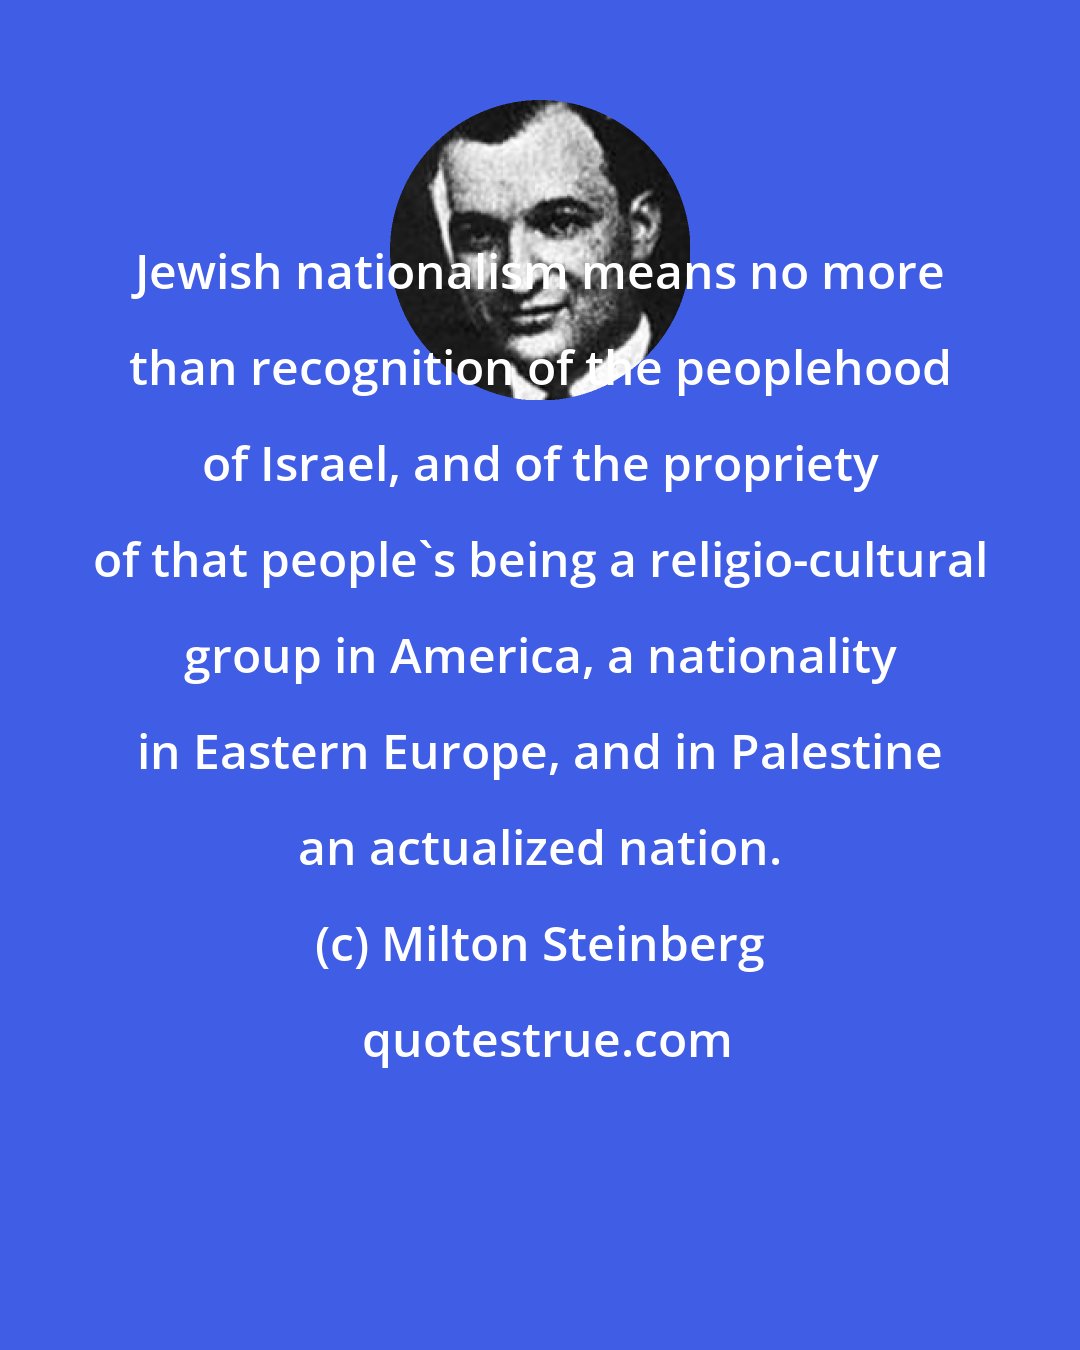 Milton Steinberg: Jewish nationalism means no more than recognition of the peoplehood of Israel, and of the propriety of that people's being a religio-cultural group in America, a nationality in Eastern Europe, and in Palestine an actualized nation.